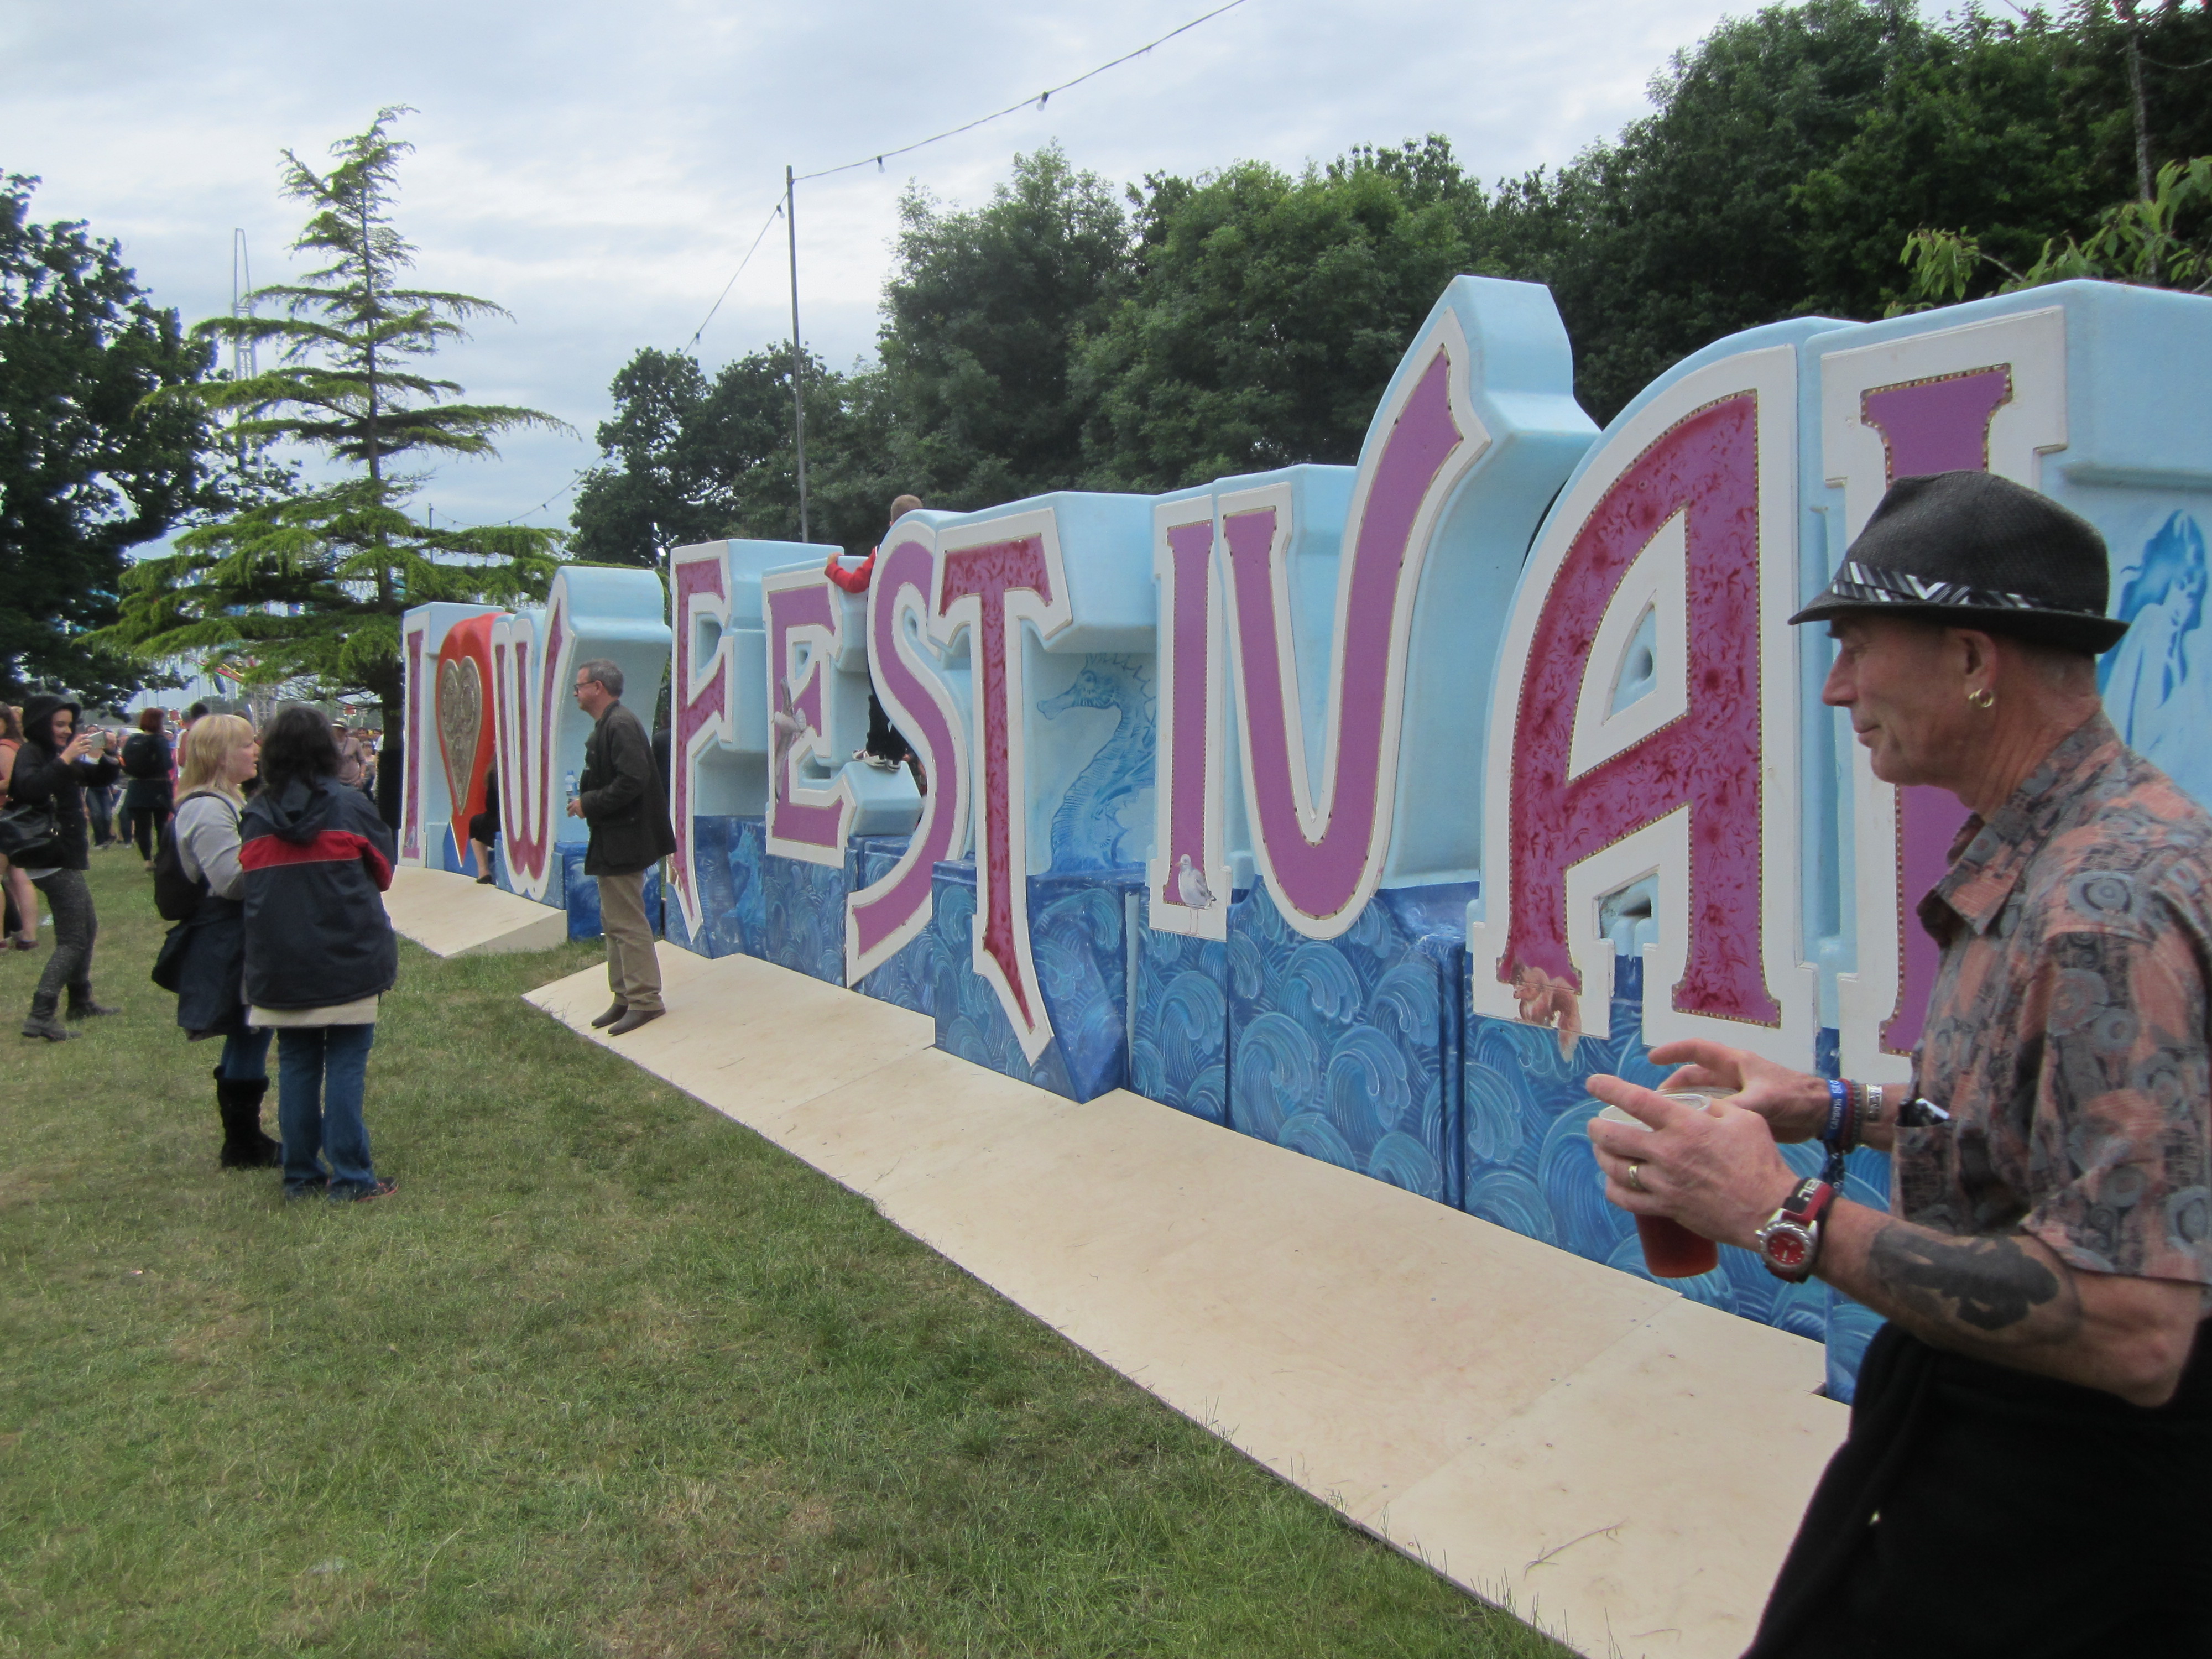 Isle of Wight Festival sign